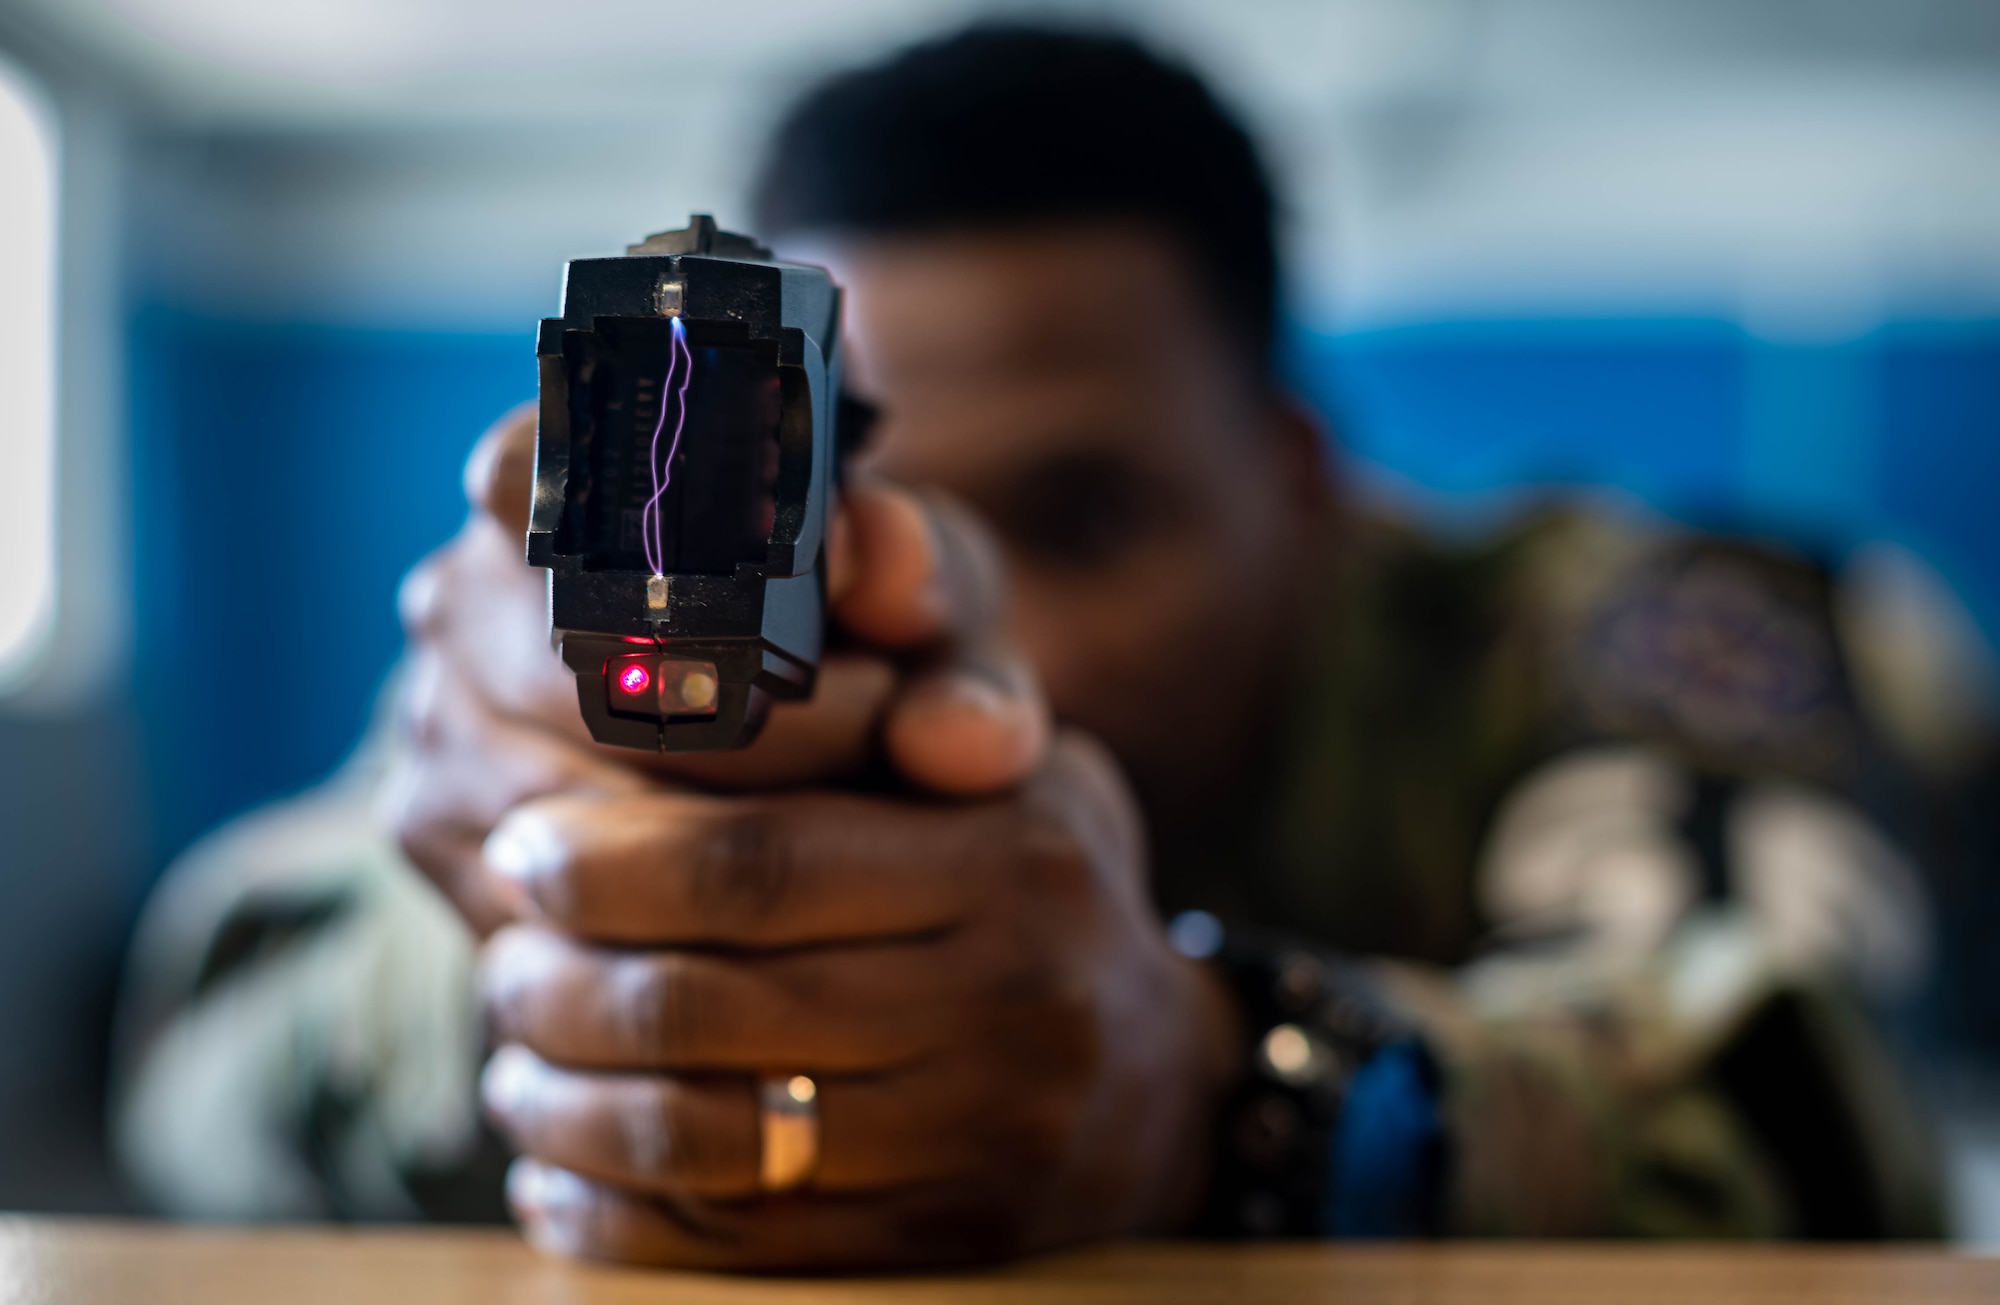 U.S. Air Force Staff Sgt. William Murray, 569th United States Forces Police Squadron unit training instructor, utilizes the drive-stun feature on a Taser X26P at Vogelweh Air Station, Germany, Nov. 29, 2021. In the event that an officer misses when shooting the weapon, they are able to use the weapon as a direct-contact stun, called the drive-stun, which is designed for pain compliance. (U.S. Air Force photo by Airman Jared Lovett)